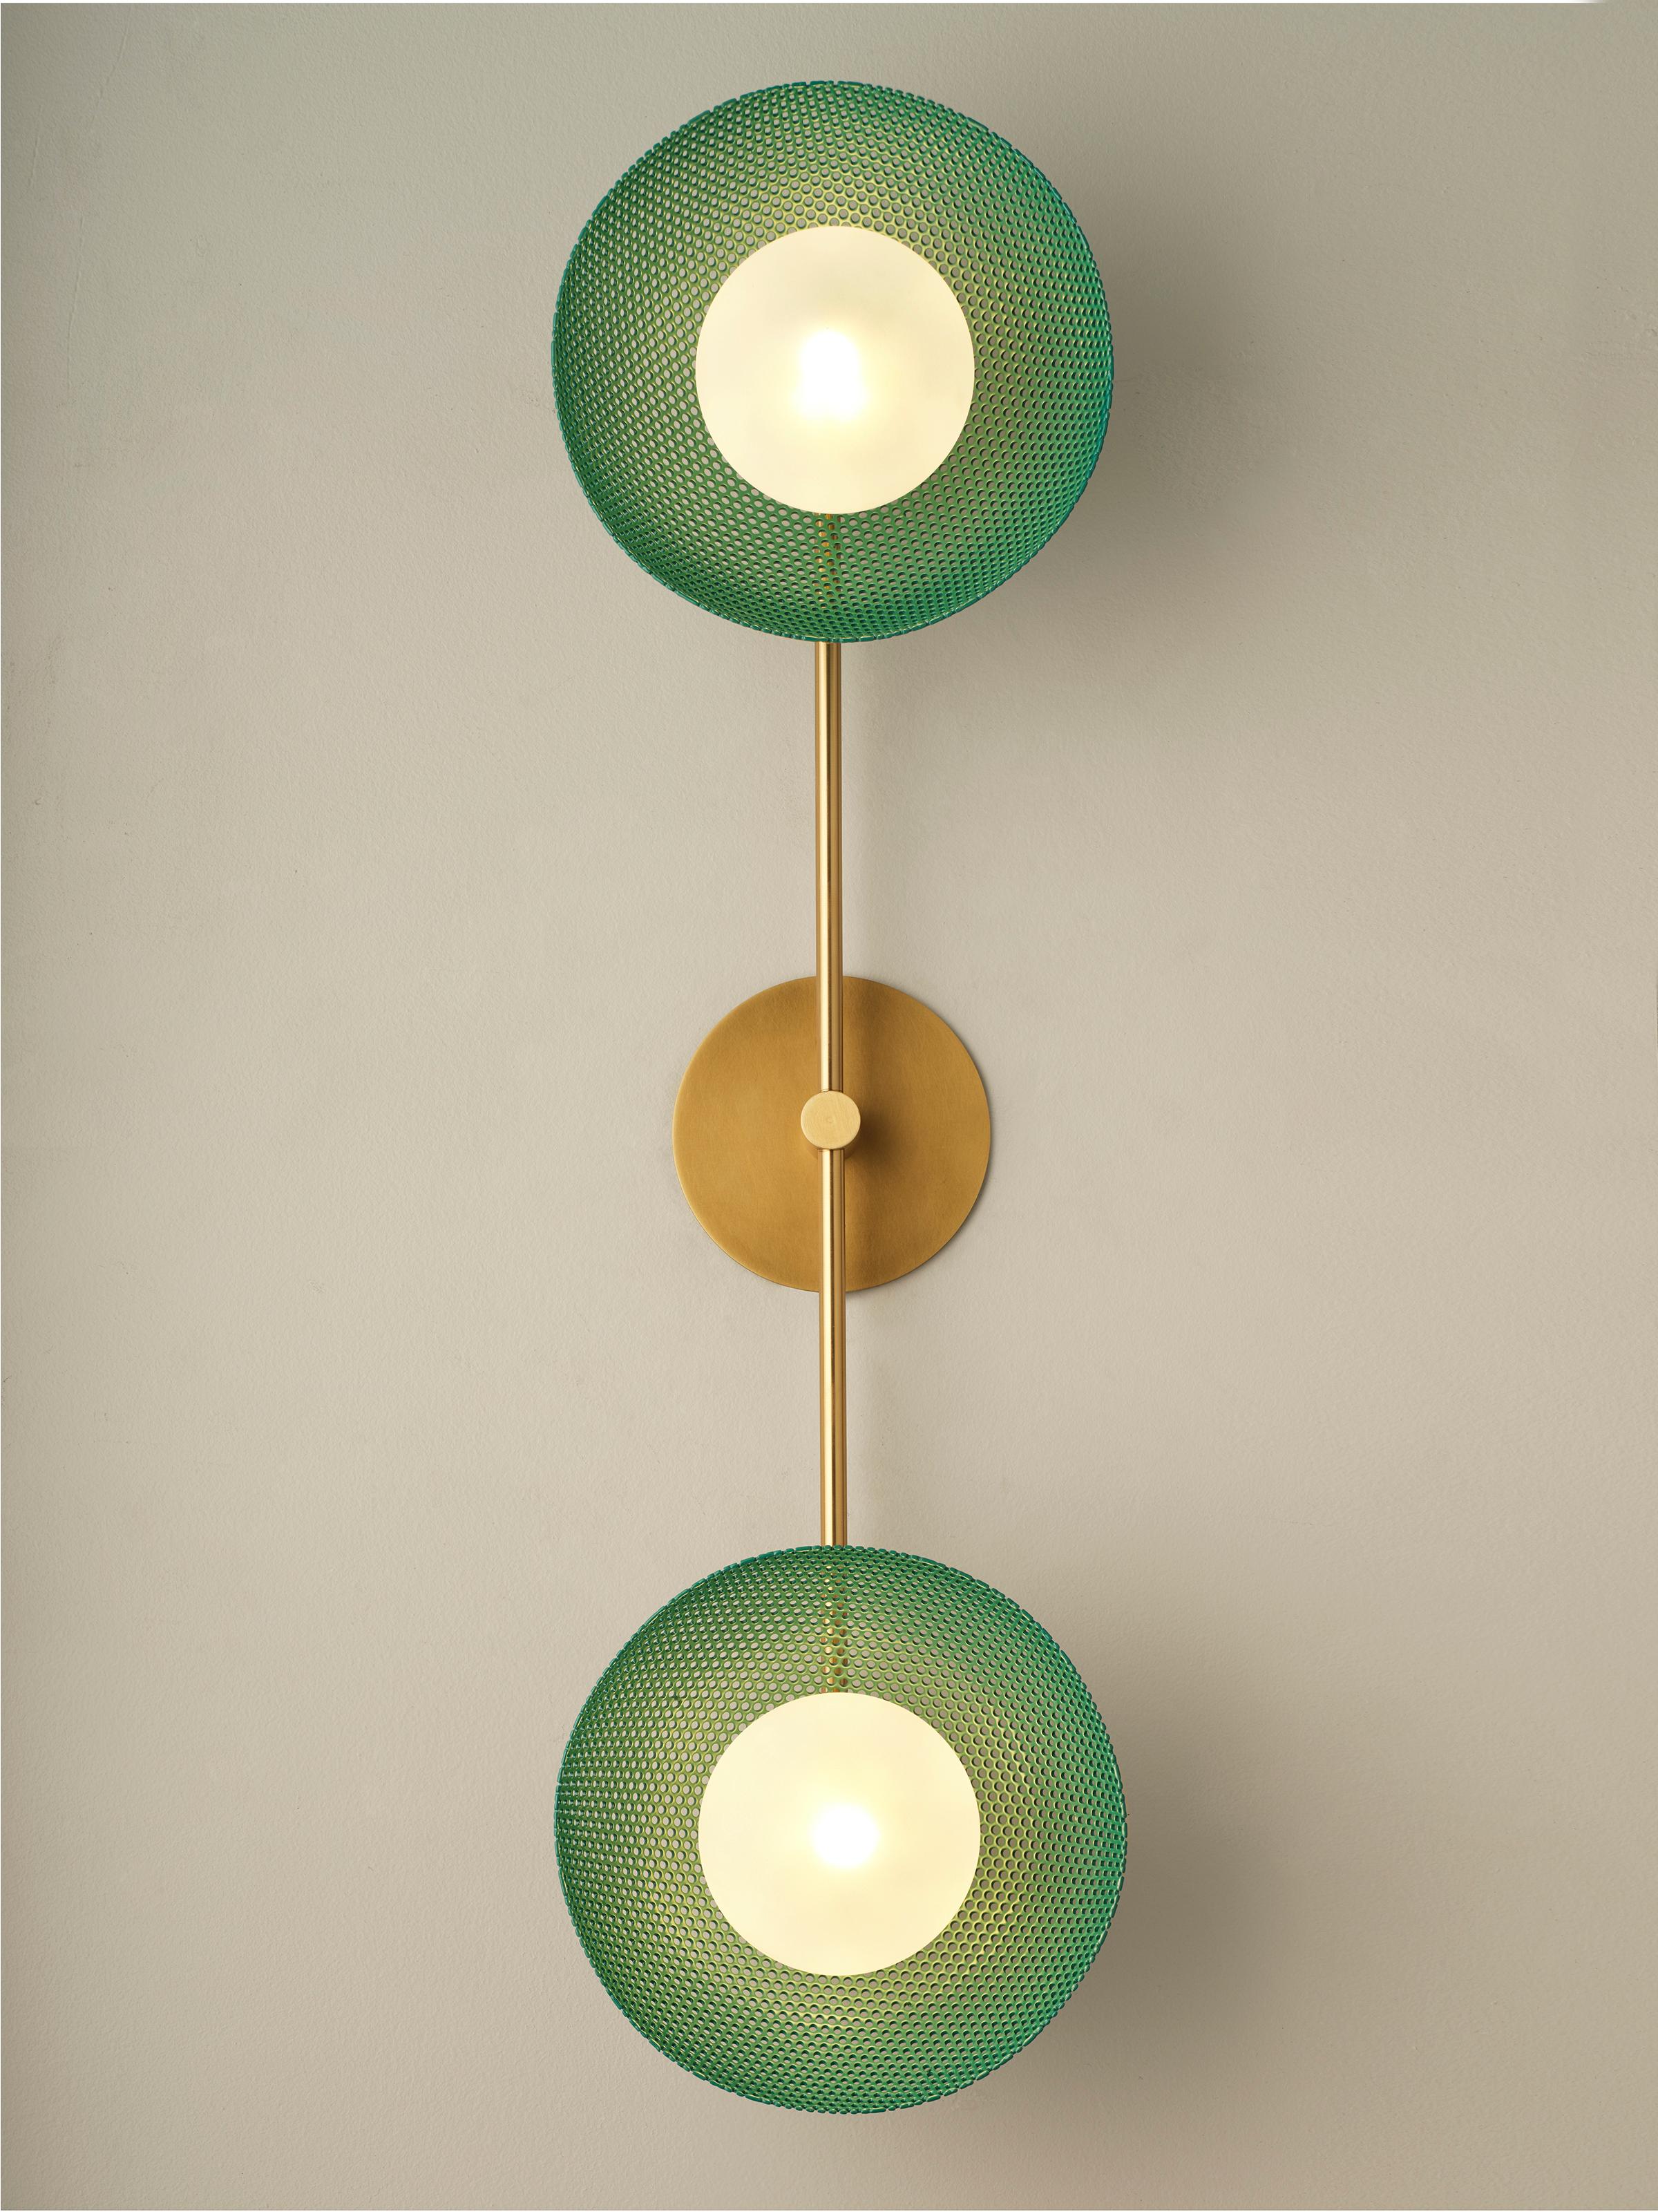 Oiled Bicentric Wall Sconce in Natural Brass & Green Enamel Mesh, Blueprint Lighting For Sale